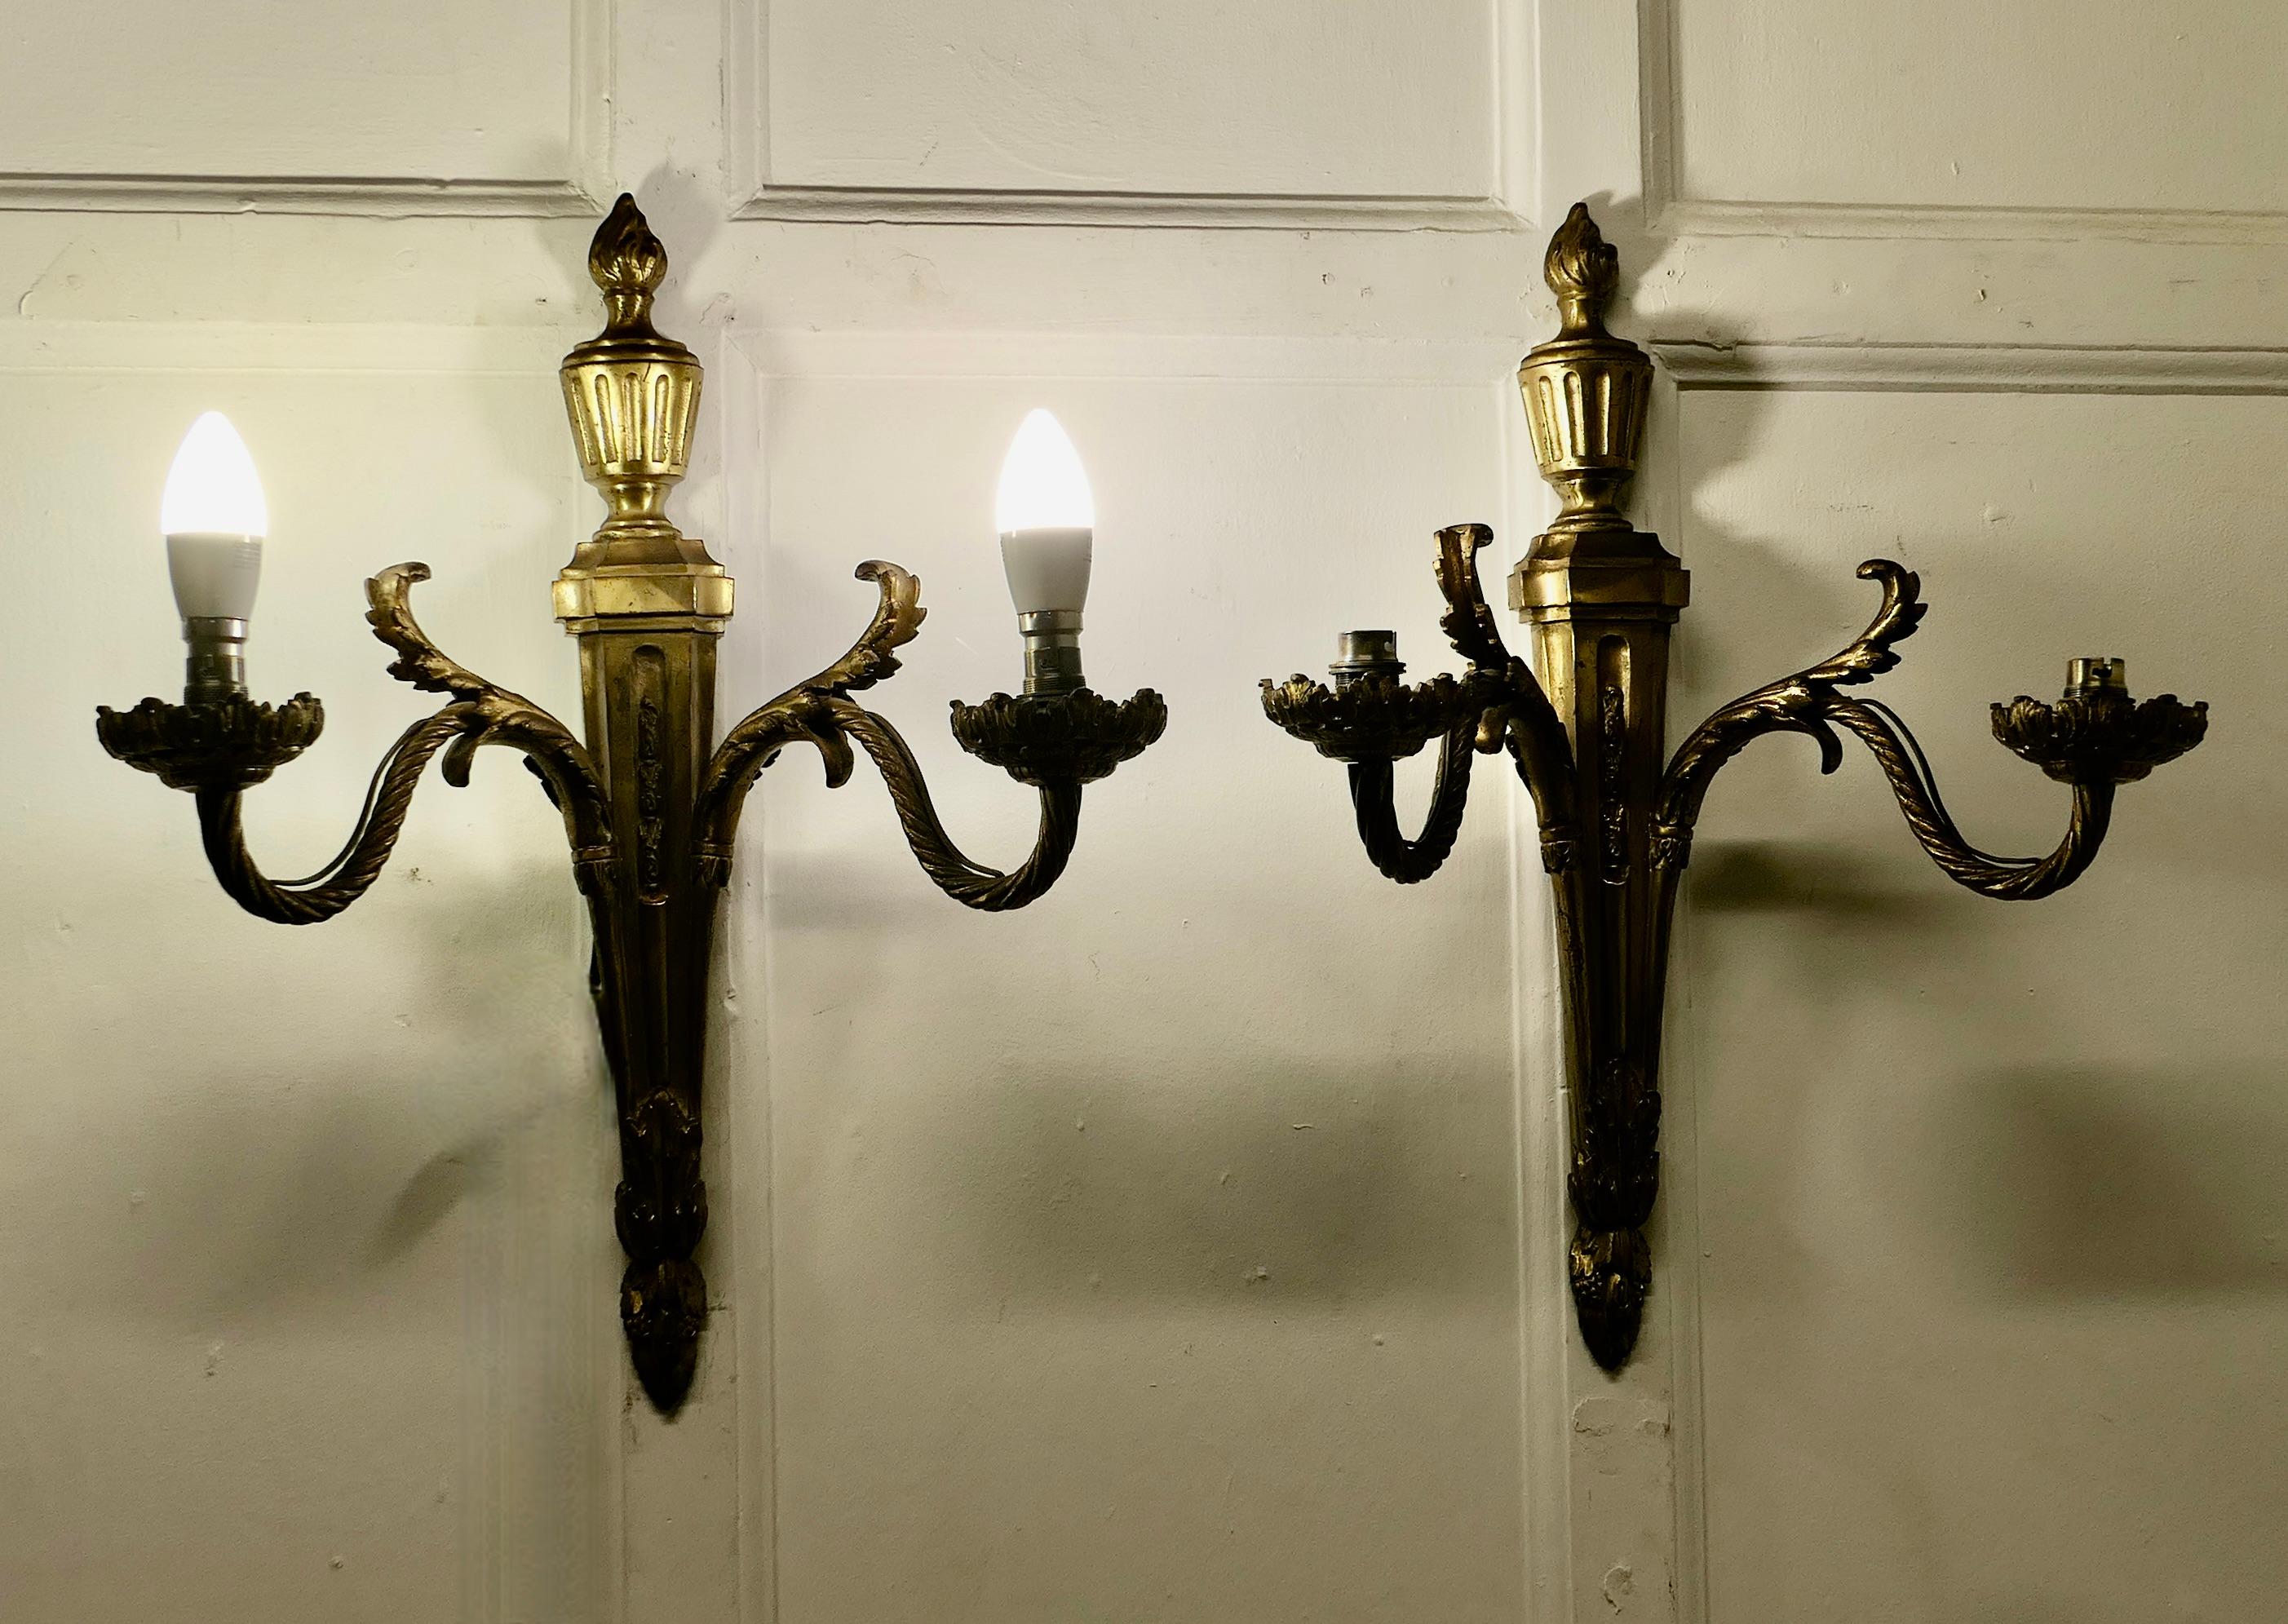 A Superb pair of French Neo Classical Large Brass Wall Lights

A very handsome pair of large very Heavy Brass wall lights, the lights are in the classical style with acanthus leaf and torch decoration each one has 2 fittings each with a sconce